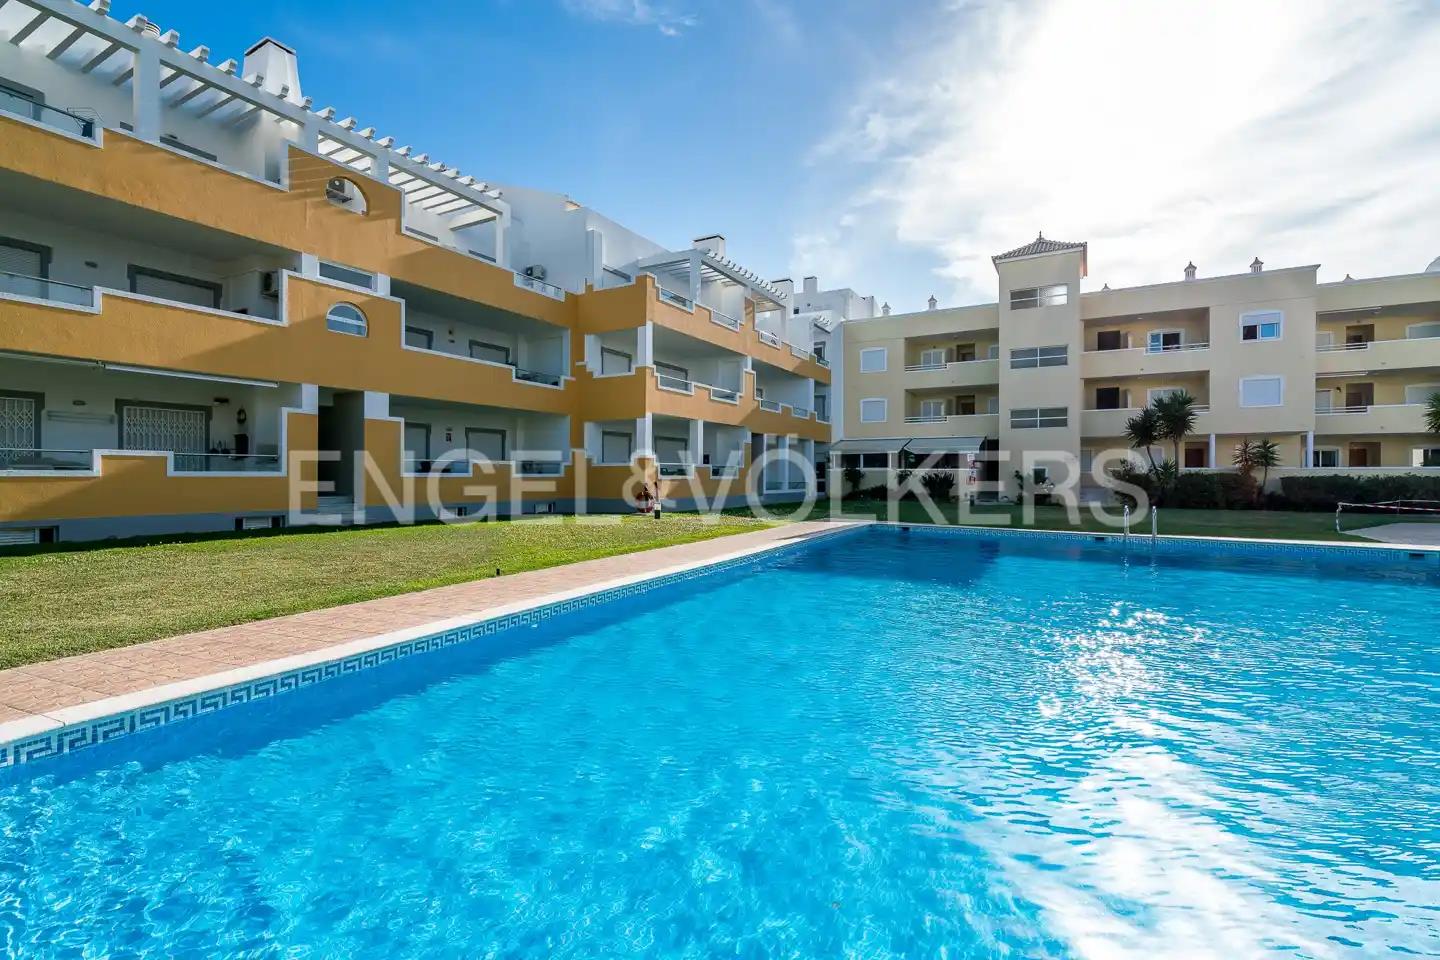 Renovated 3-bedroom Apartment with Pool in Vilamoura.